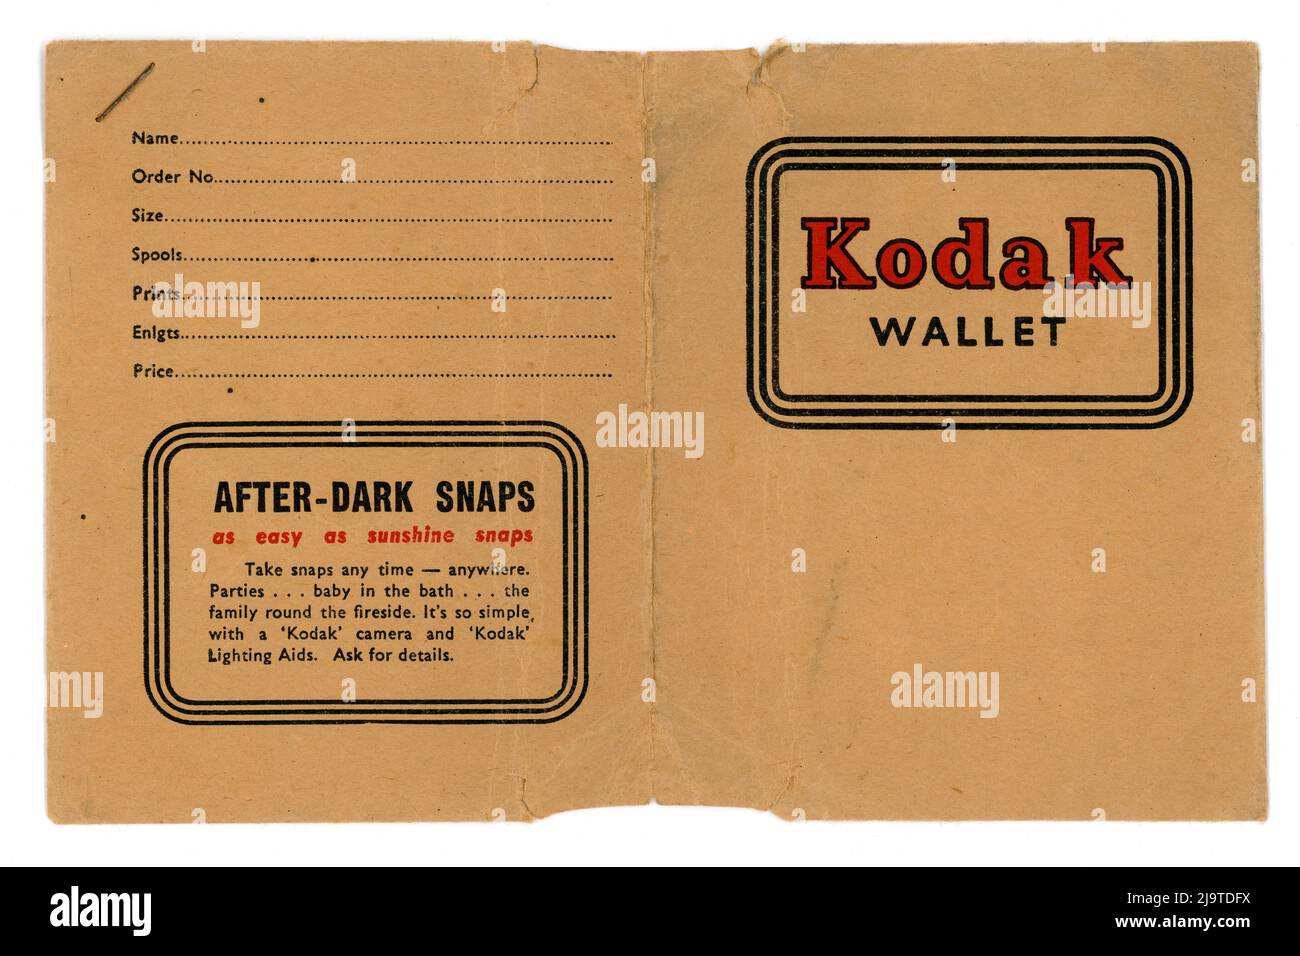 Original 1930's Kodak photo wallet, opened out to show customer details, used by a British customer in 1937, U.K. Stock Photo